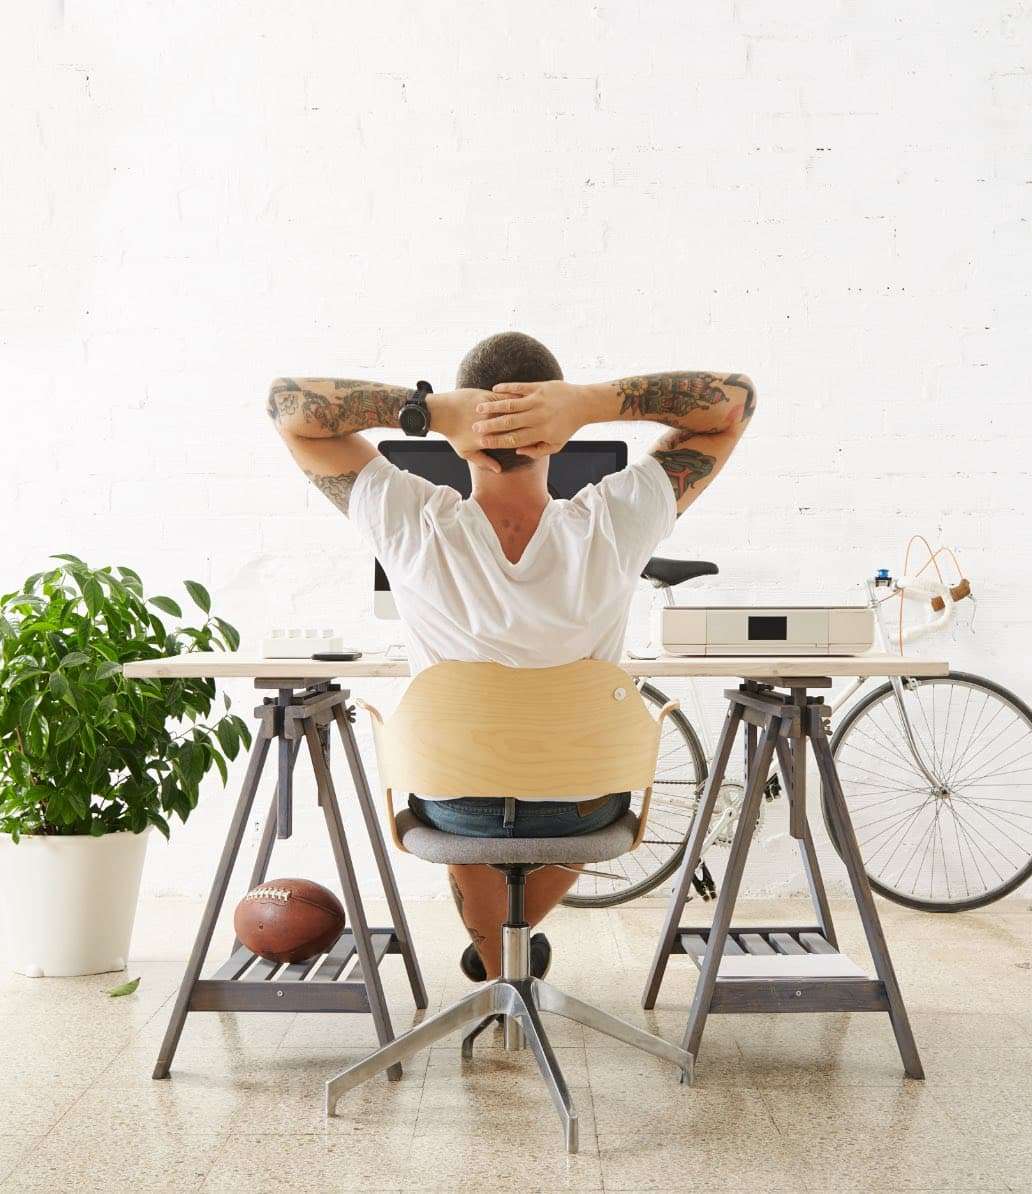 A person sits relaxed at a modern workstation with hands clasped behind head, facing a white wall. desk has computer and plant, with a bicycle leaning nearby.